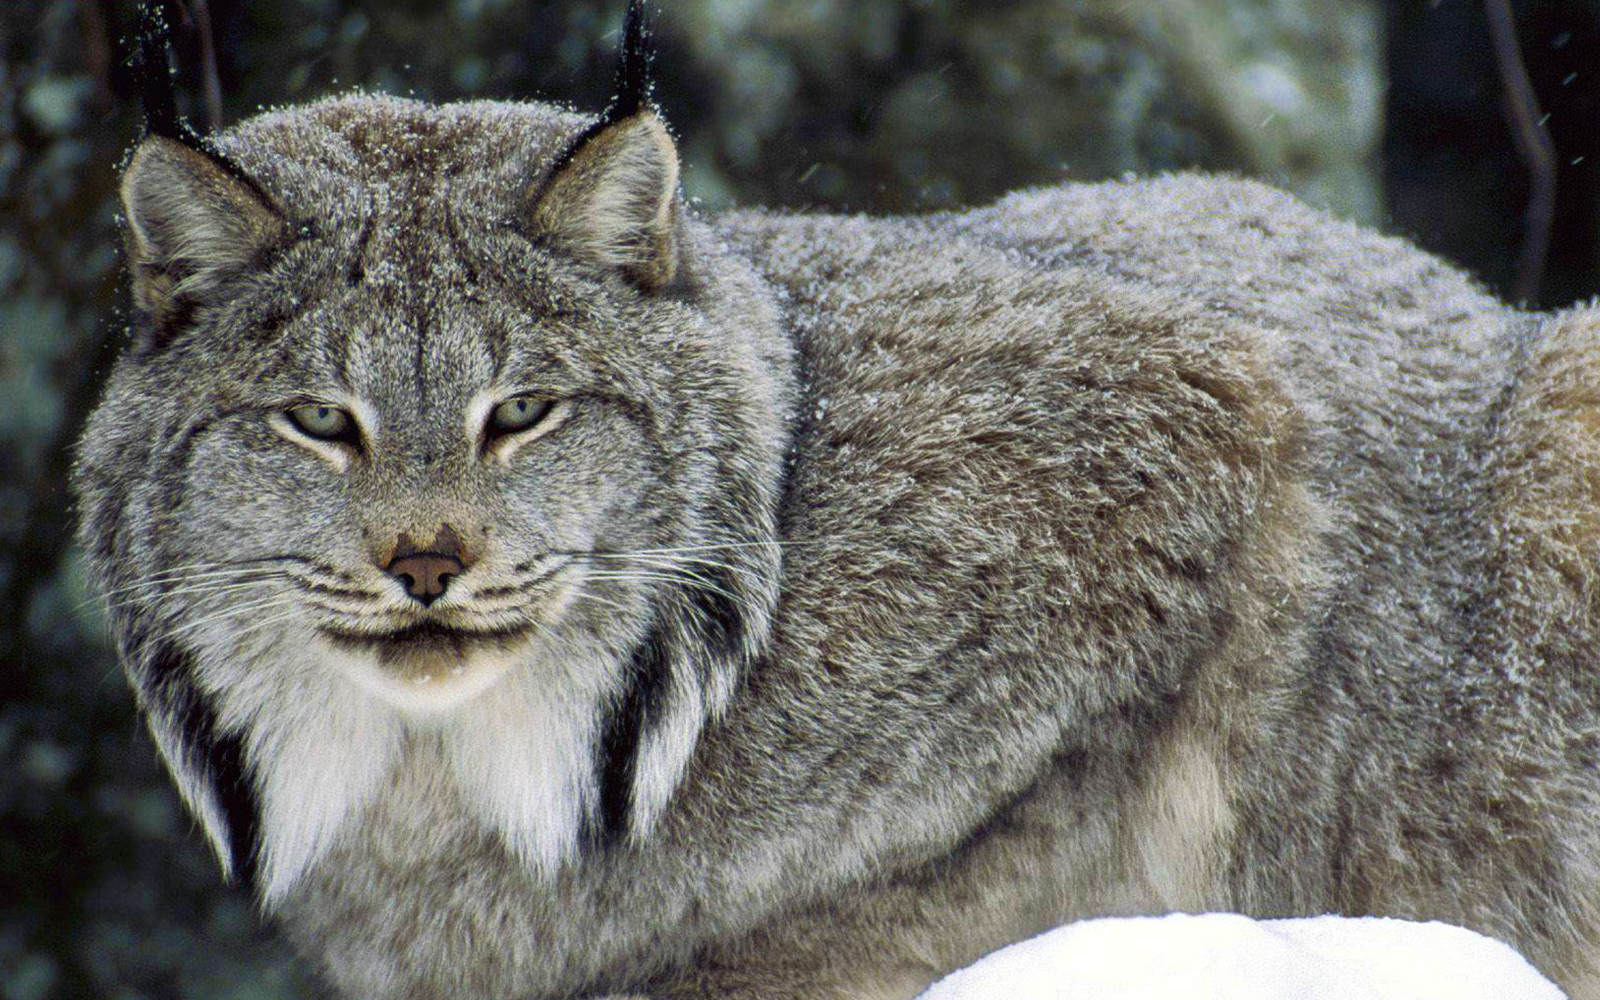 Missing lynx: Advocates challenge Feds’ refusal to prepare recovery plan